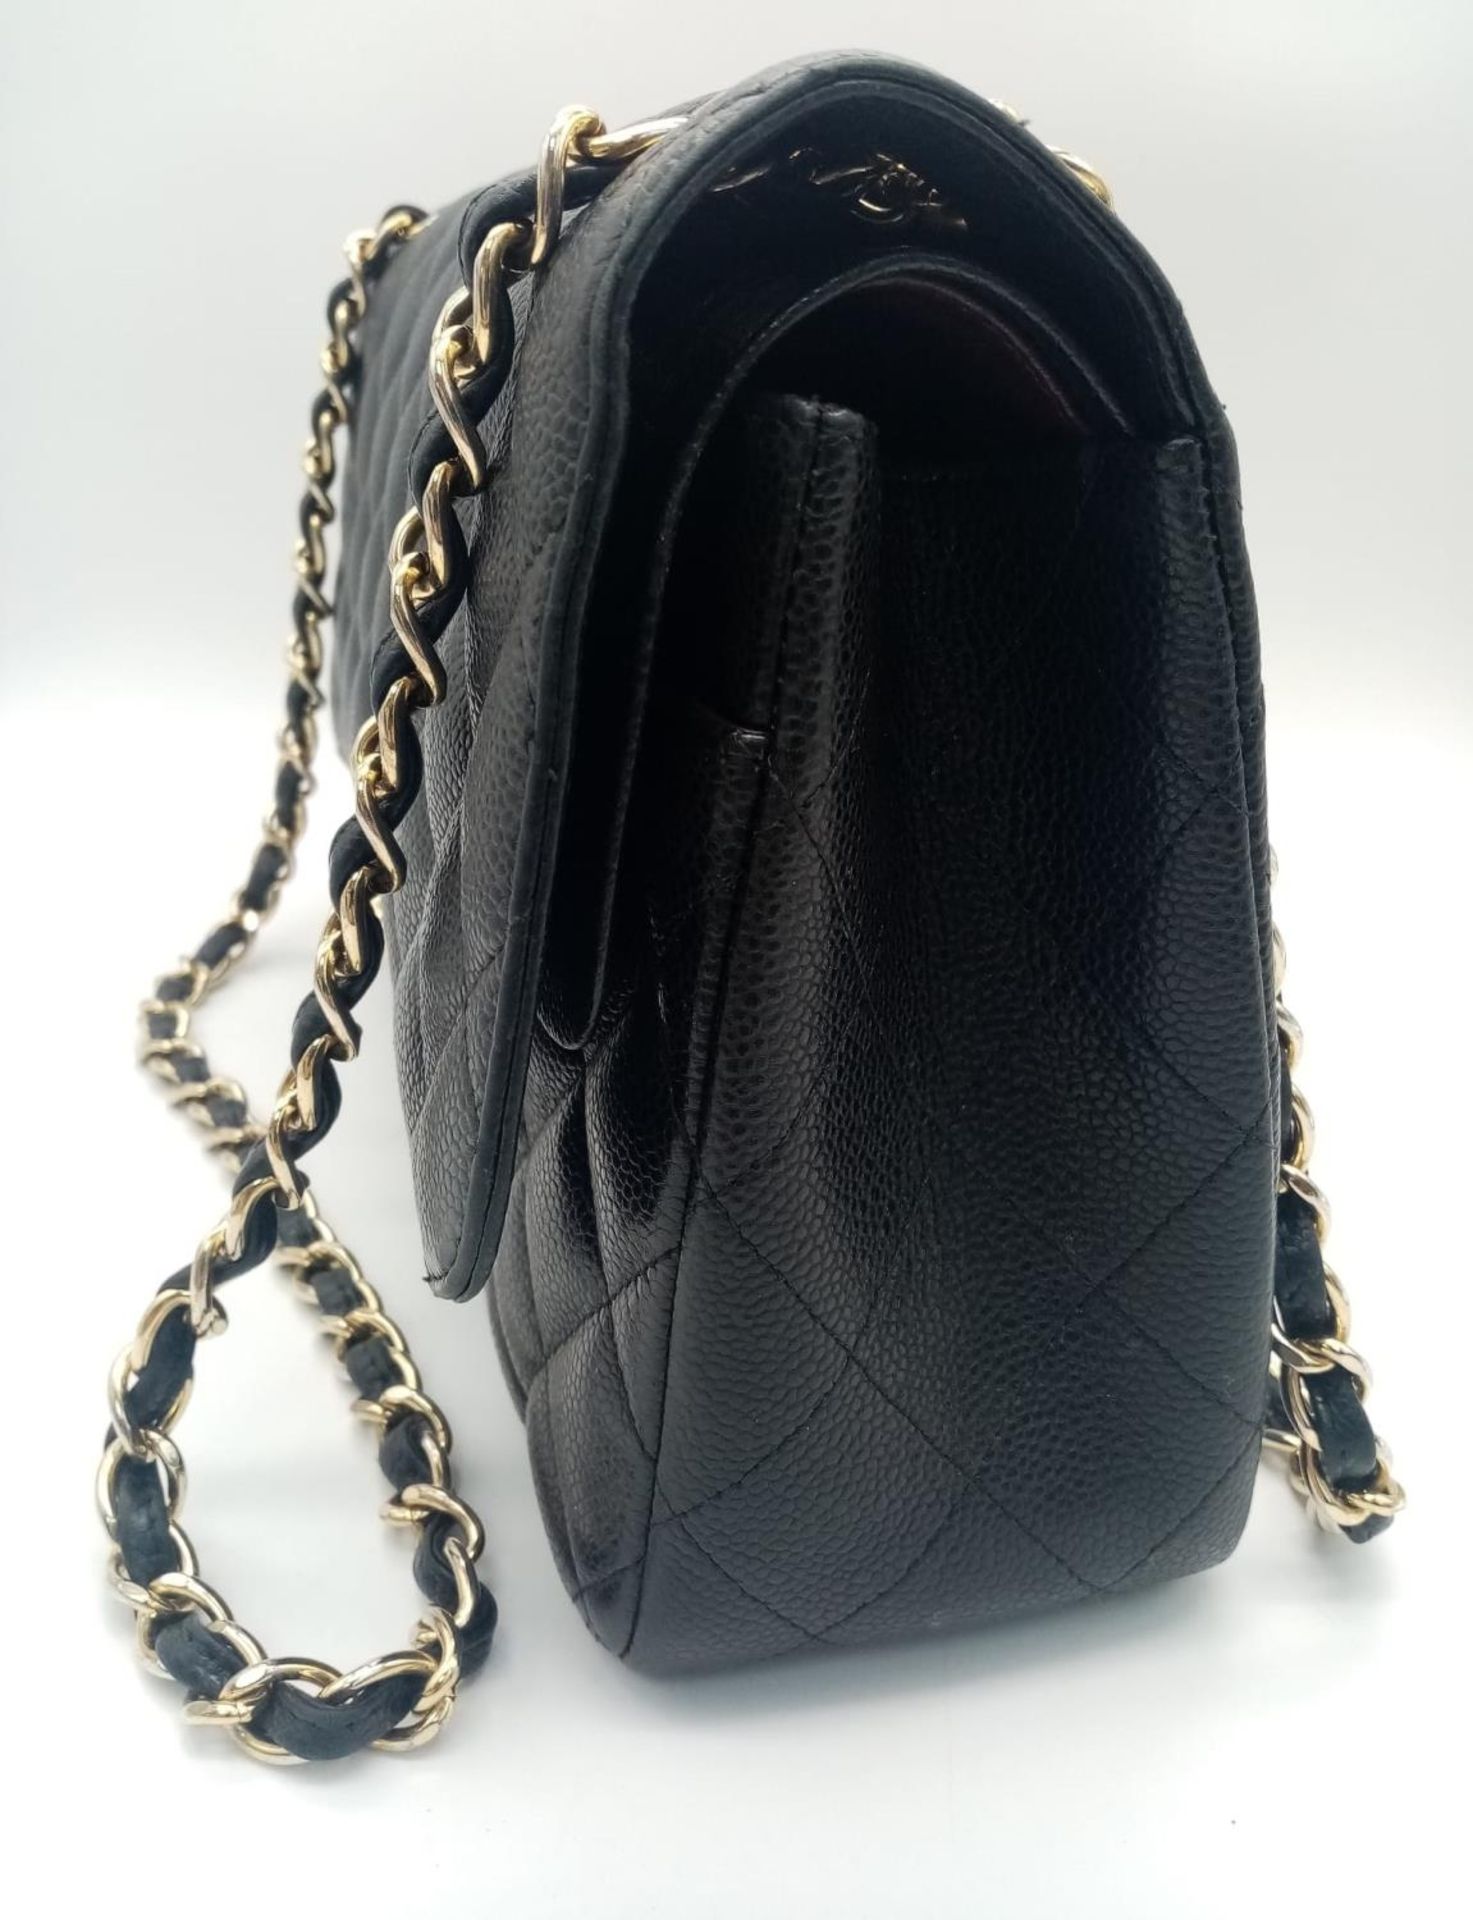 A Chanel Black Caviar Classic Double Flap Bag. Quilted pebbled leather exterior with gold-toned - Image 4 of 11